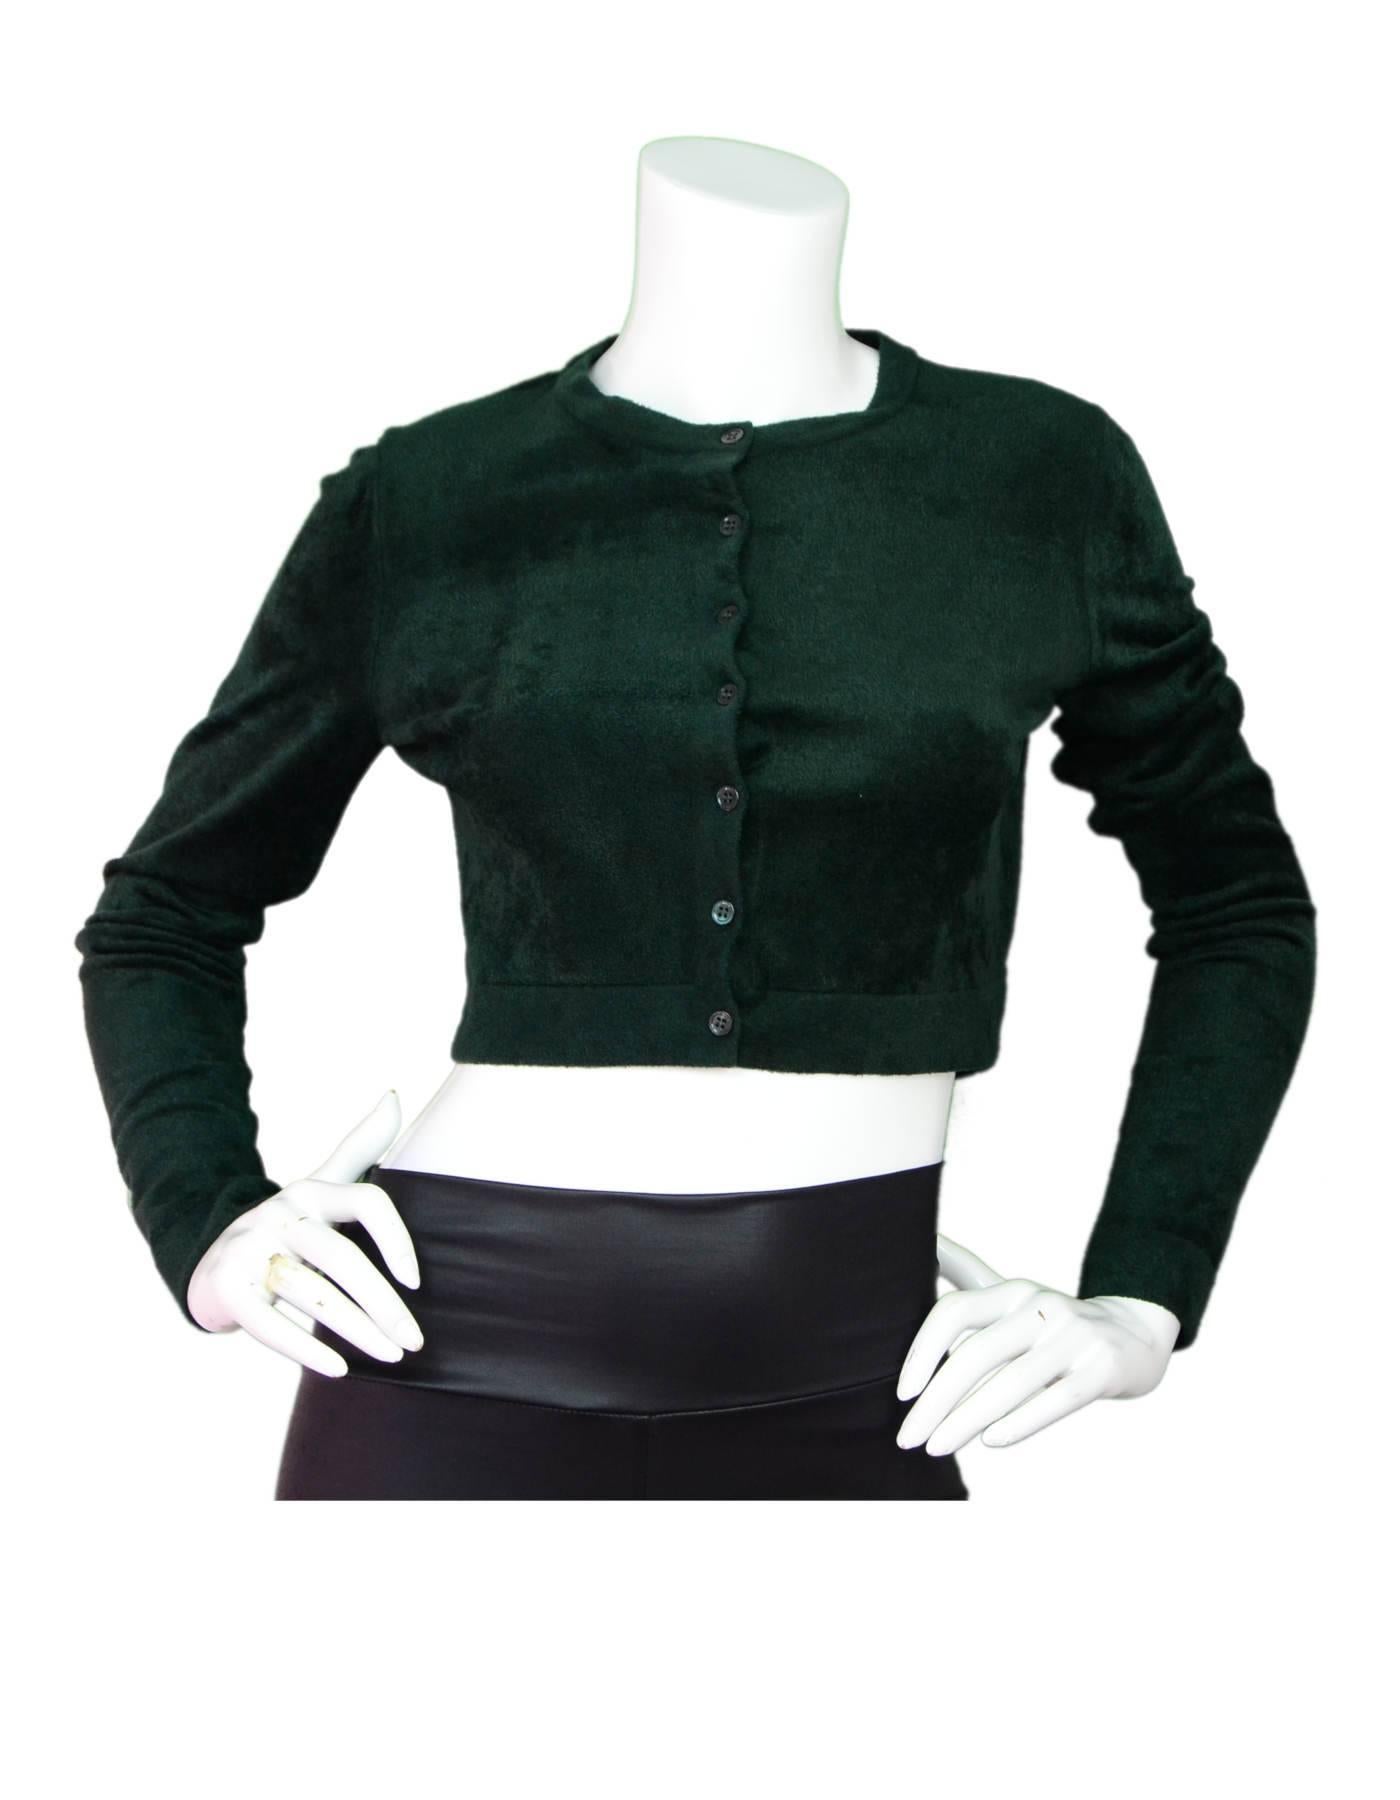 Alaia Green Velvet Cropped Cardigan Sz FR40

Made In: Italy
Color: Green
Composition: 63% viscose, 37% nylon
Lining: None
Closure/Opening: Front button closure
Exterior Pockets: None
Interior Pockets: None
Overall Condition: Excellent pre-owned